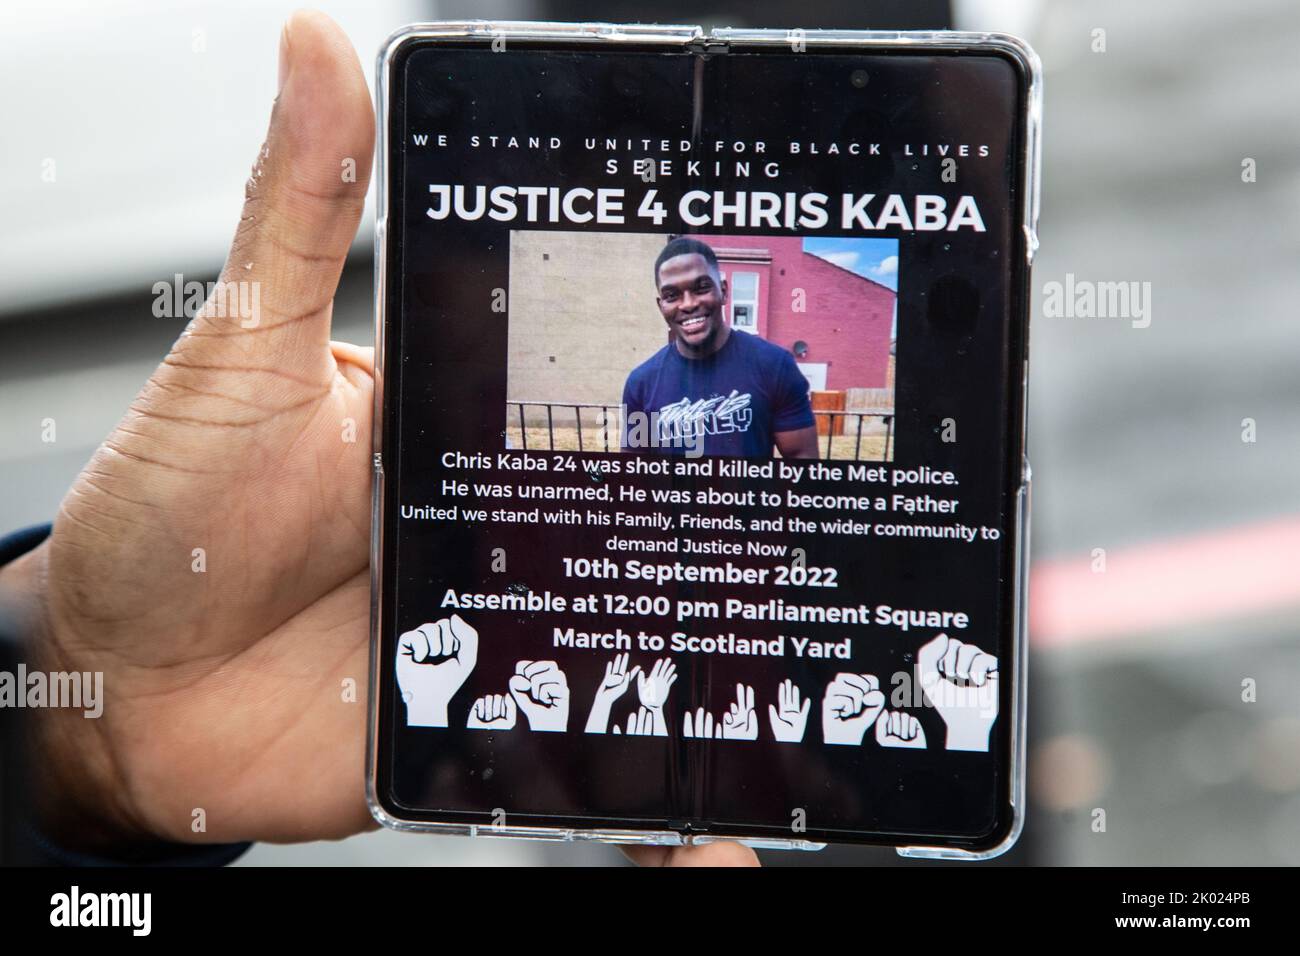 London, UK, 9th Sep 2022 London UK A Man shows protestters a digital flyer for a planed  demonstration for Chris Kaba whot was shot dead by police.  Chris Kaba, 24, was shot dead by an armed Met Police unit following a car chase in Streatham, south London. An investigation by the Independent Office for Police Conduct found out that he was not armed. Stock Photo